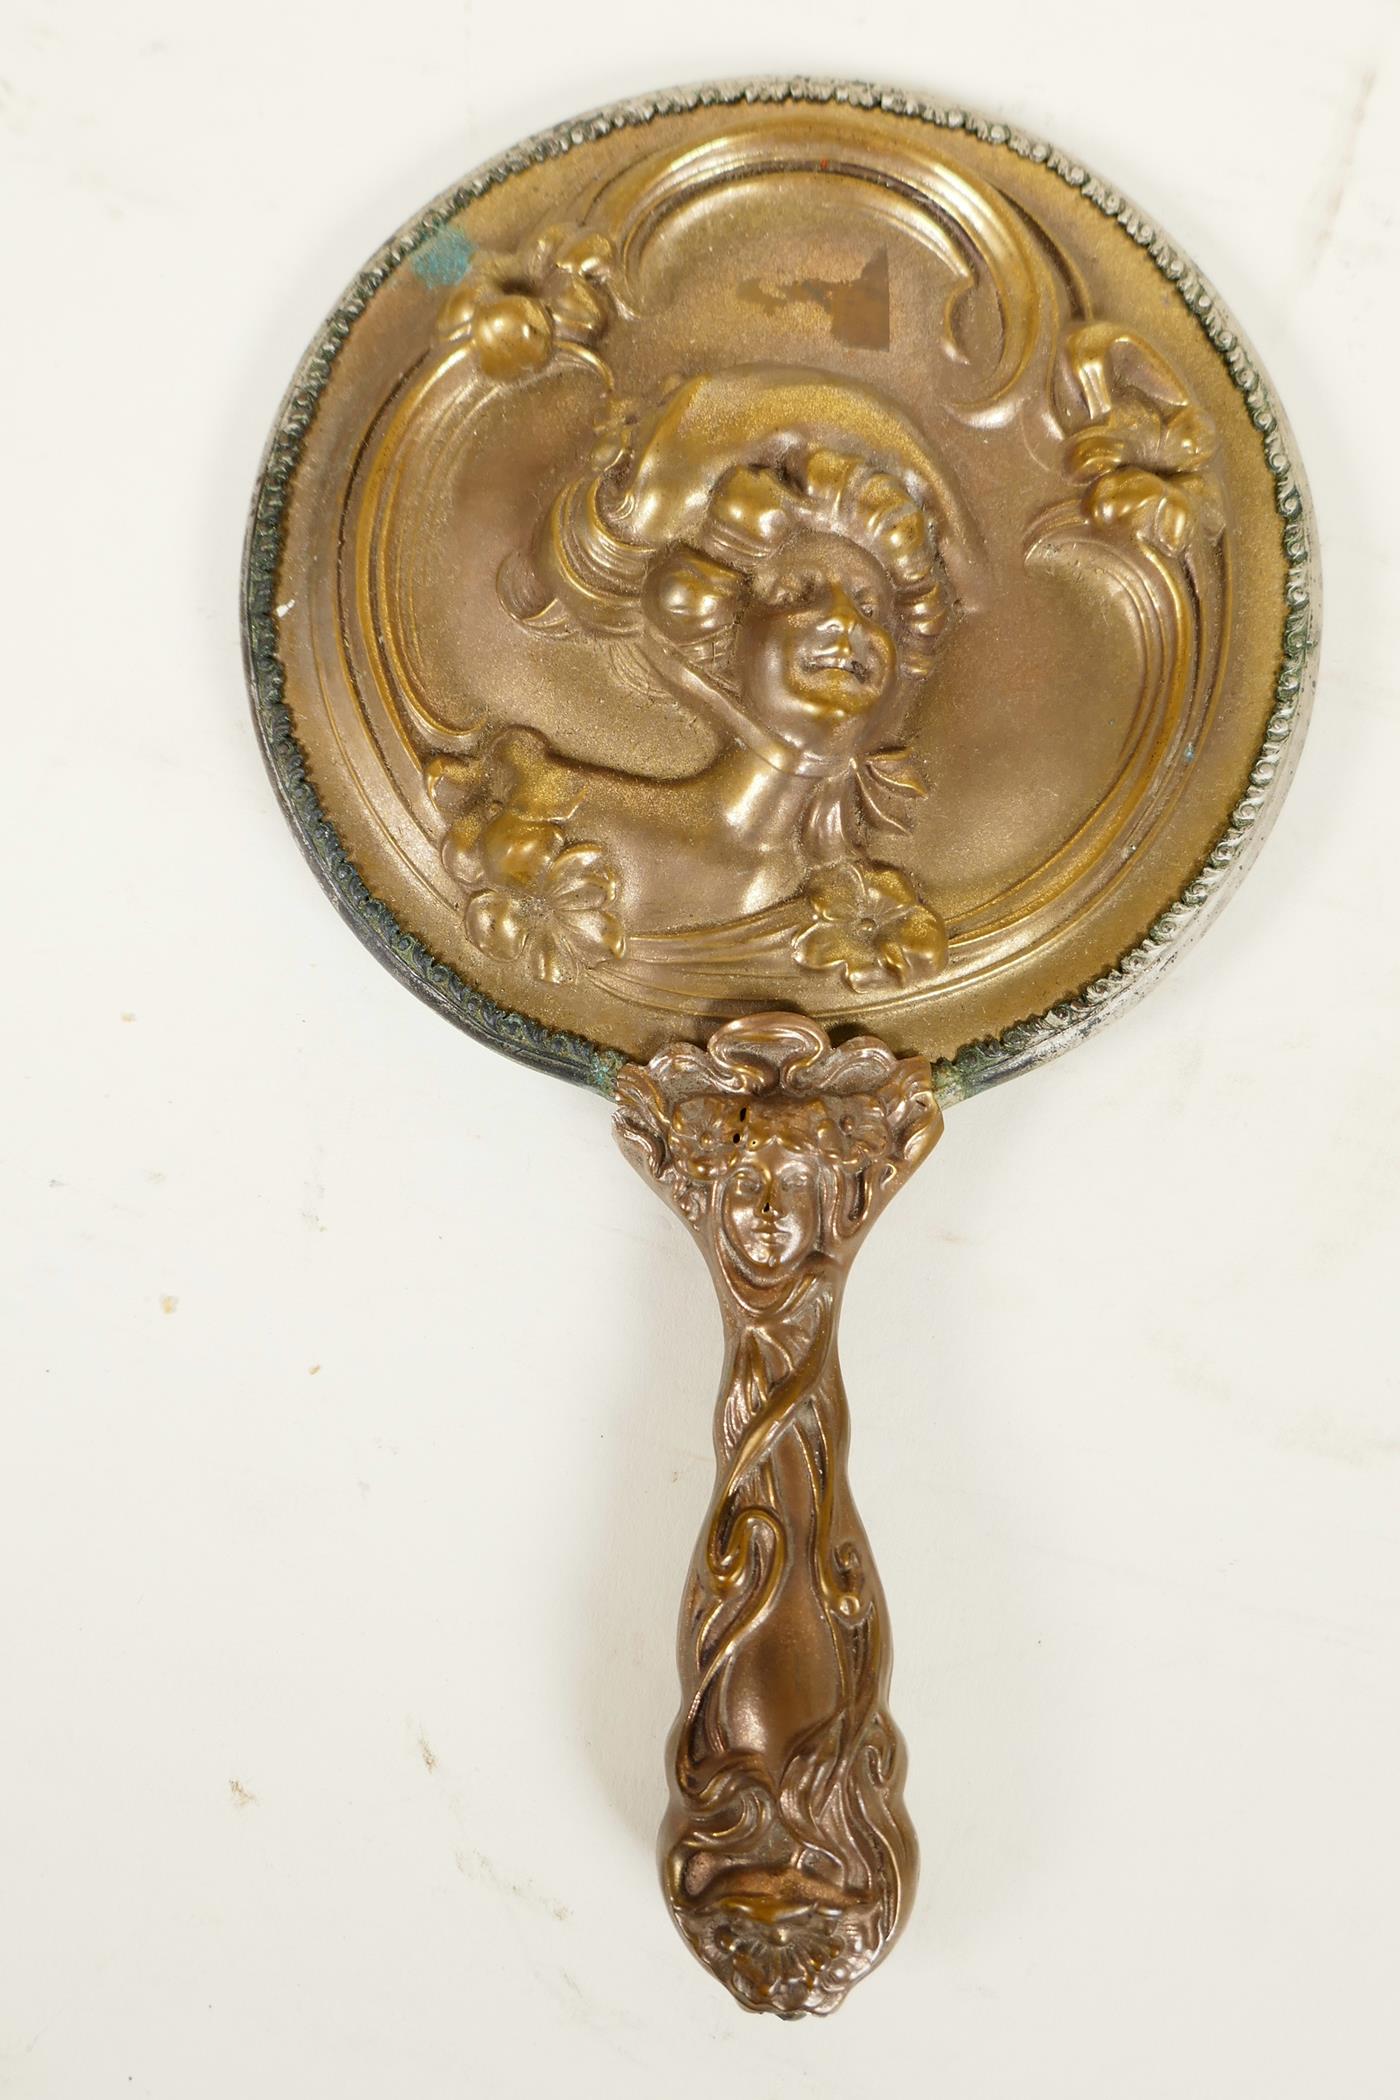 A C19th Art Nouveau bronze hand mirror embossed with scrolls and faces, and bejewelled glass mirror,